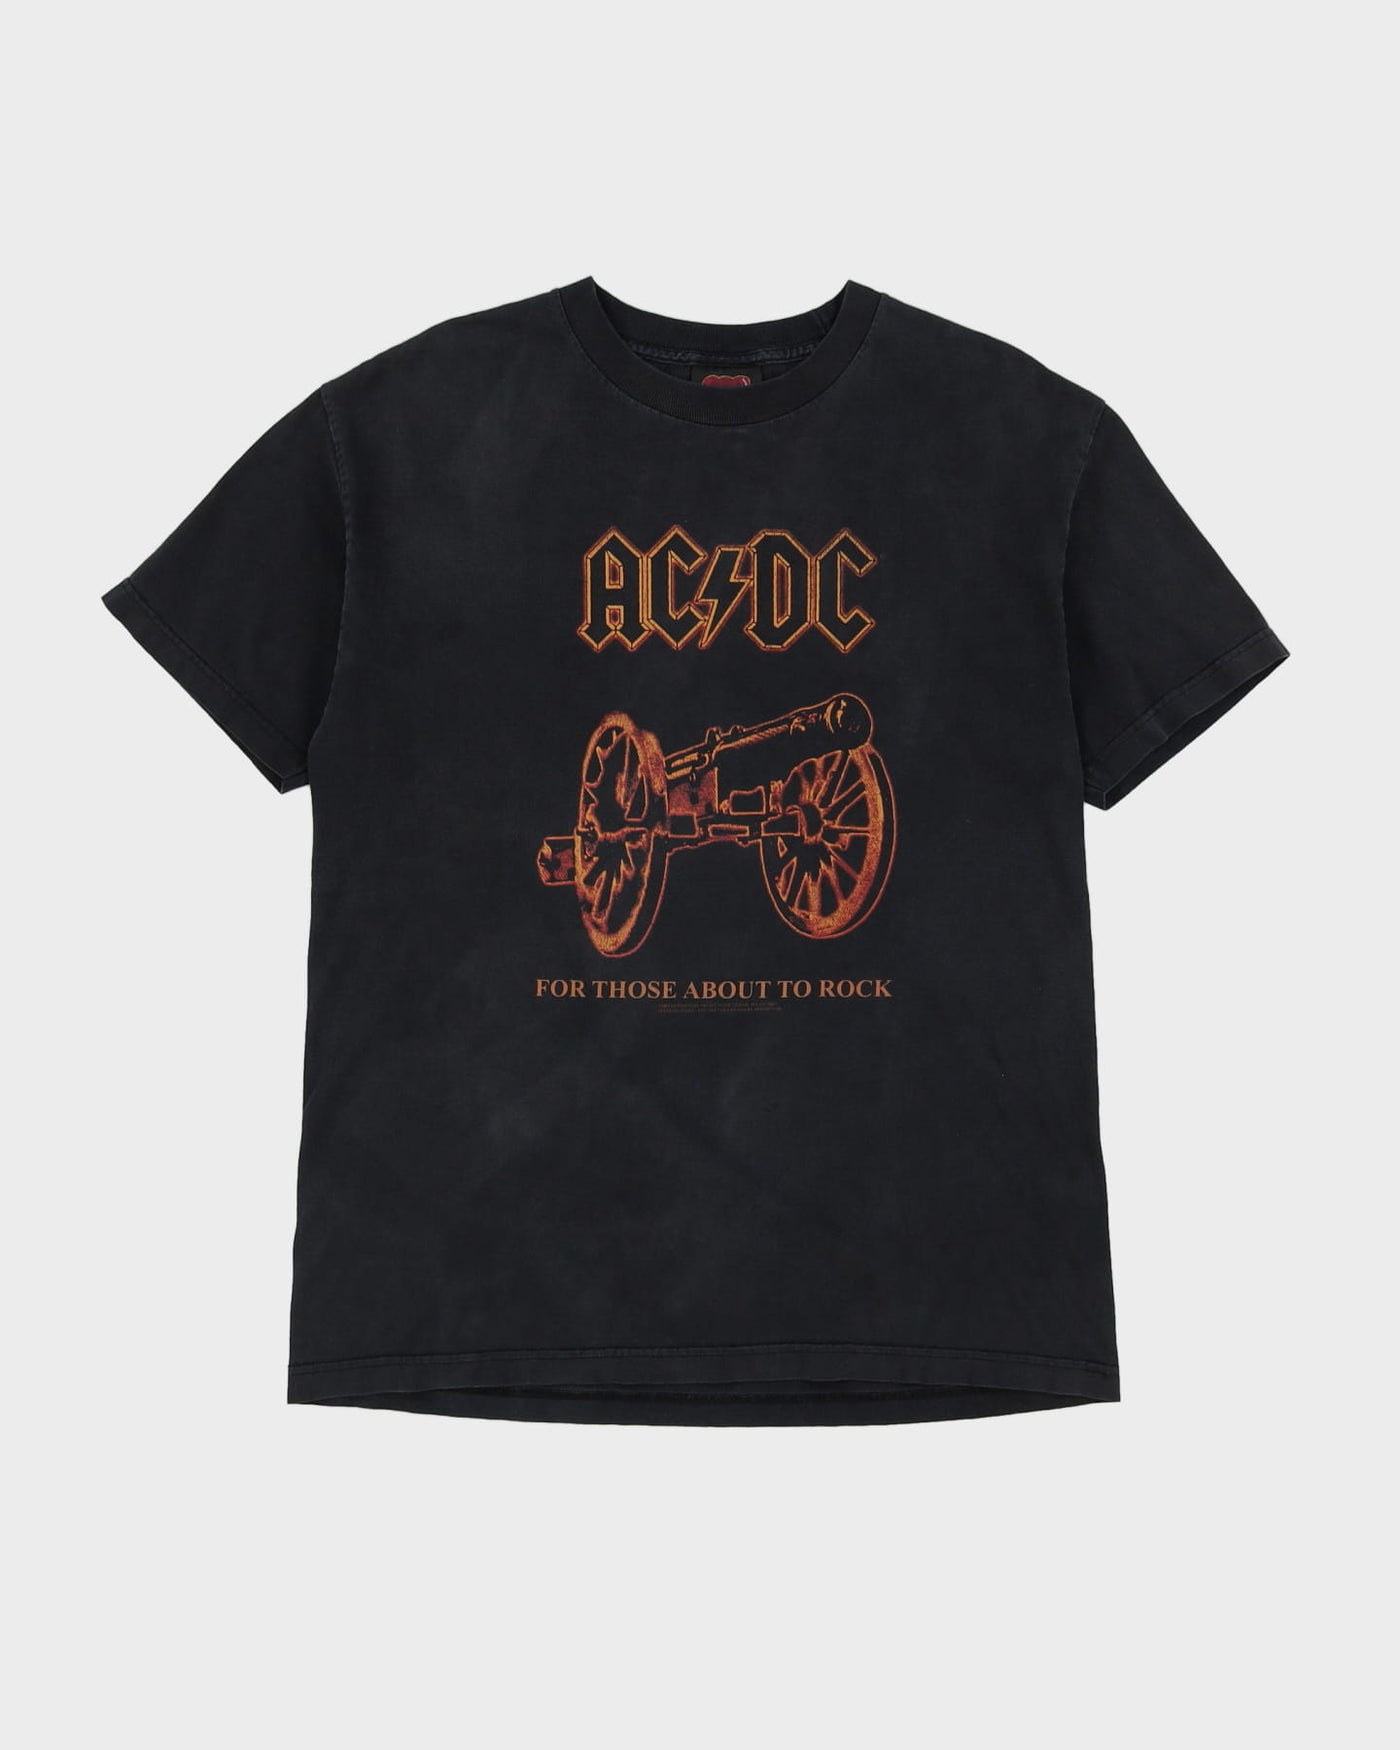 ACDC For Those About To Rock T-Shirt - XL